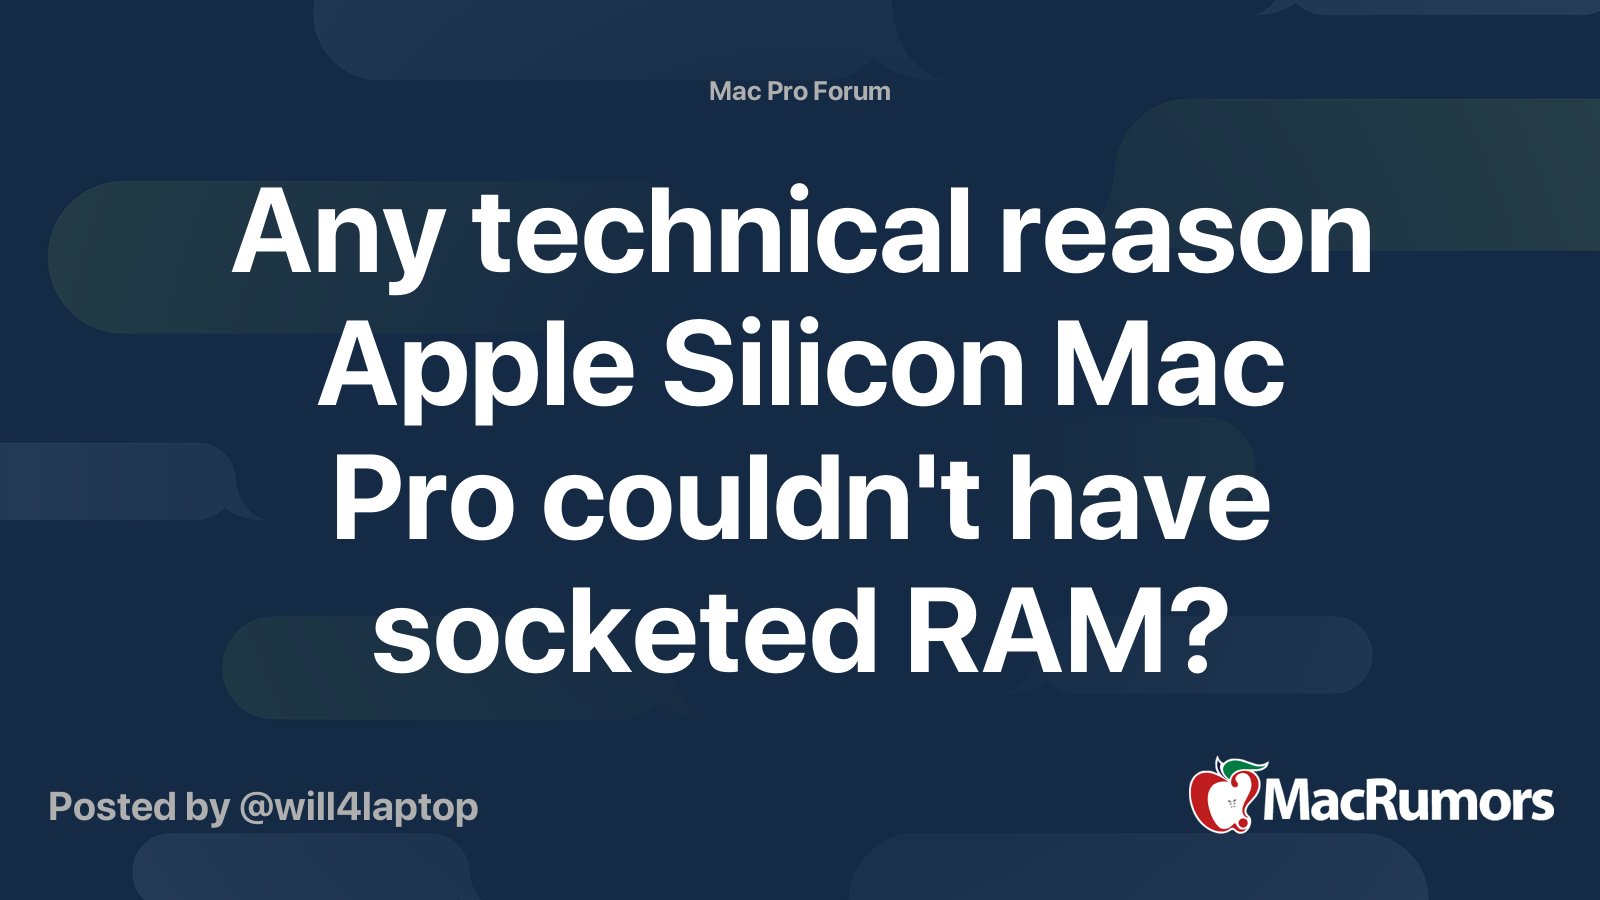 Any technical reason Apple Silicon Mac Pro couldn't have socketed RAM?